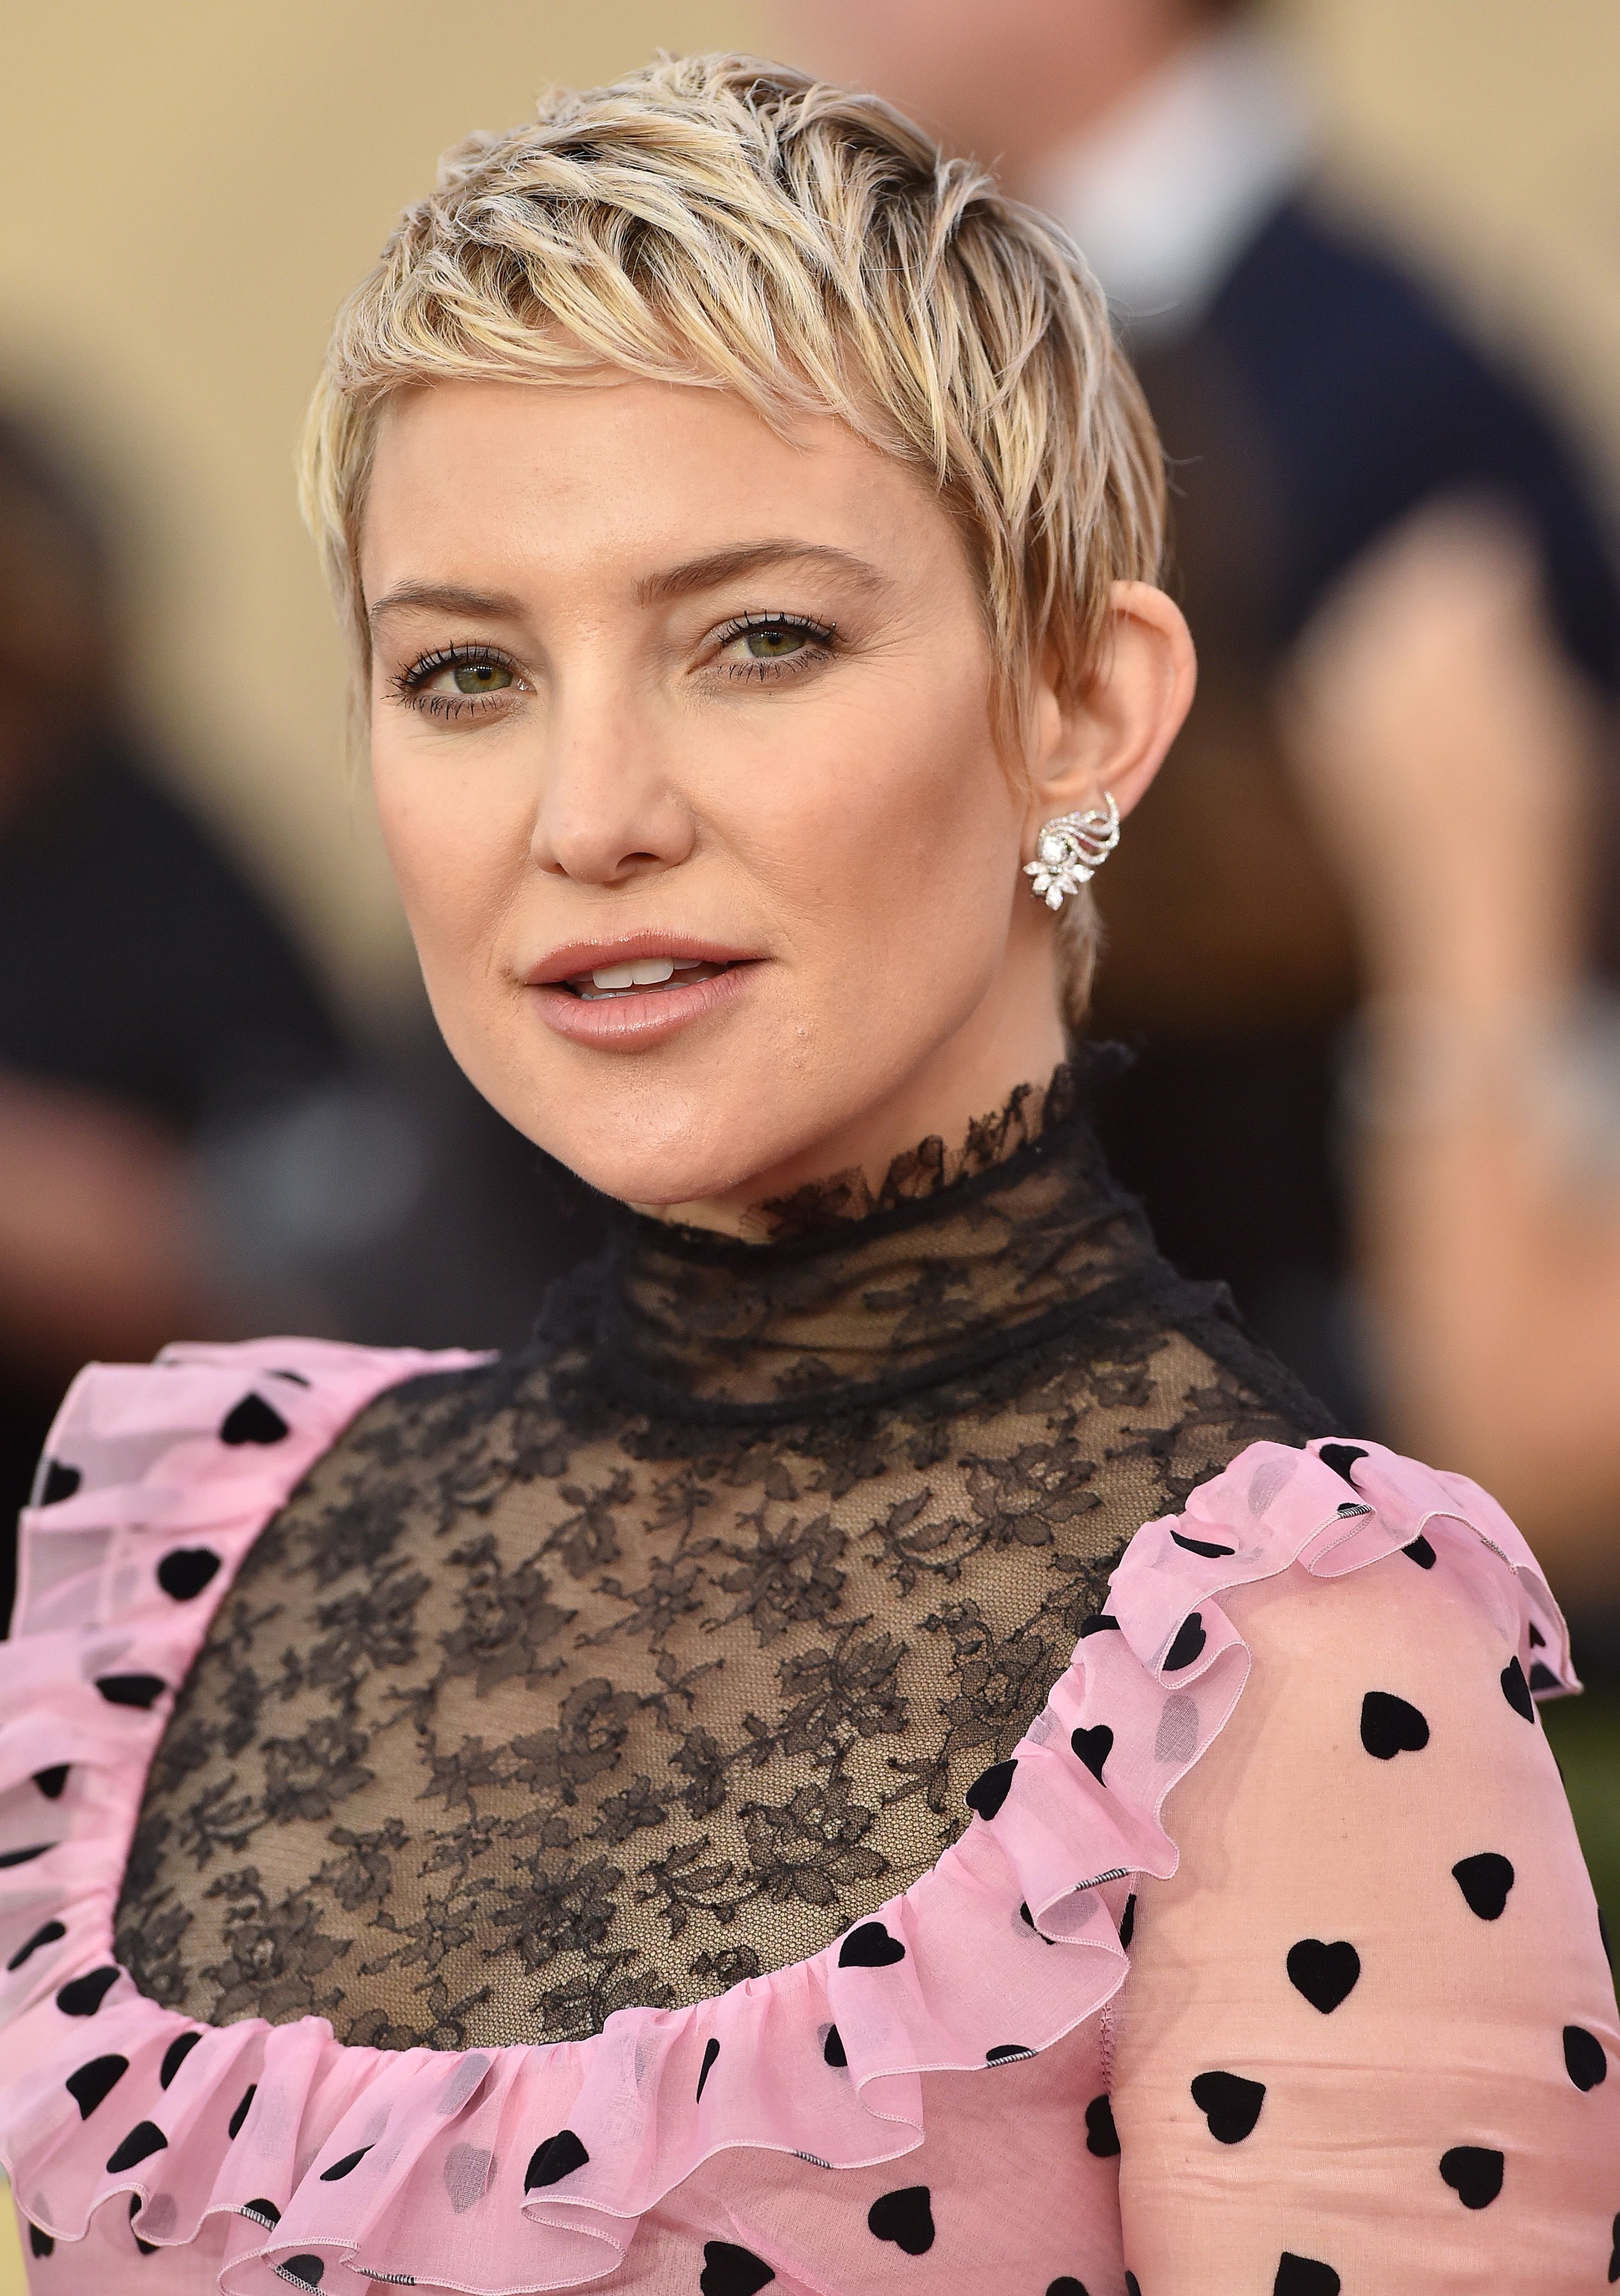 Pixie cuts | Best celebrity short hairstyle inspiration